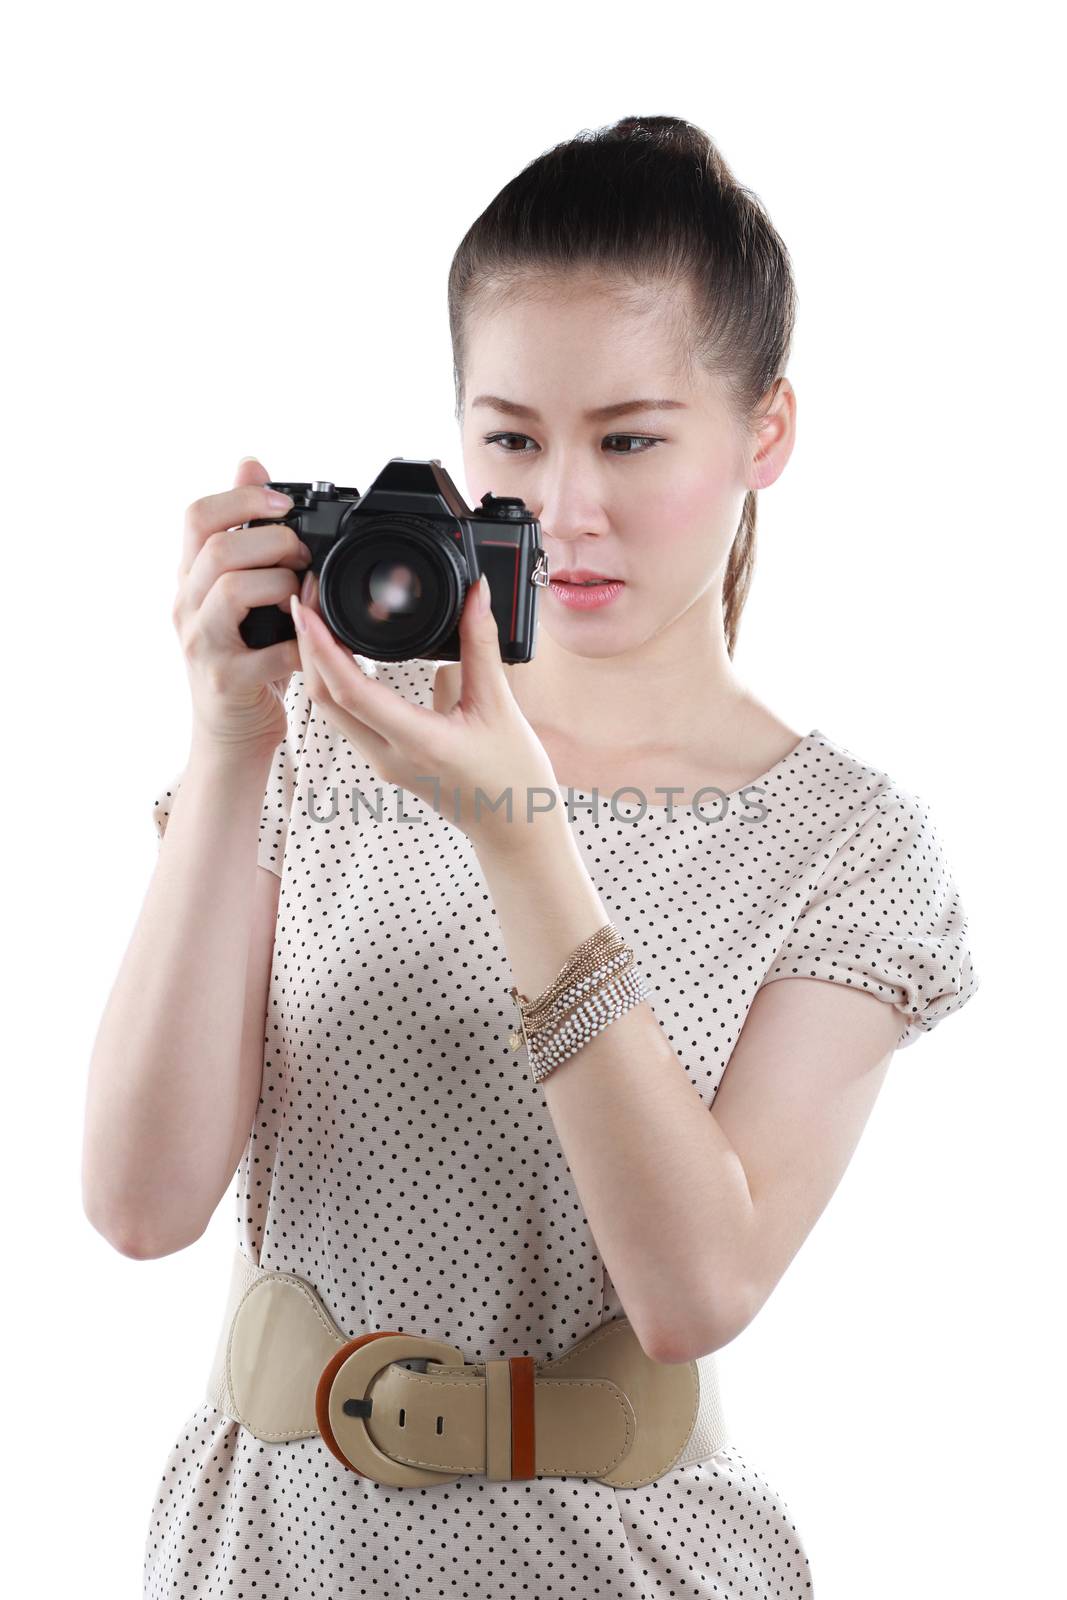 Woman photographer by charn_w.